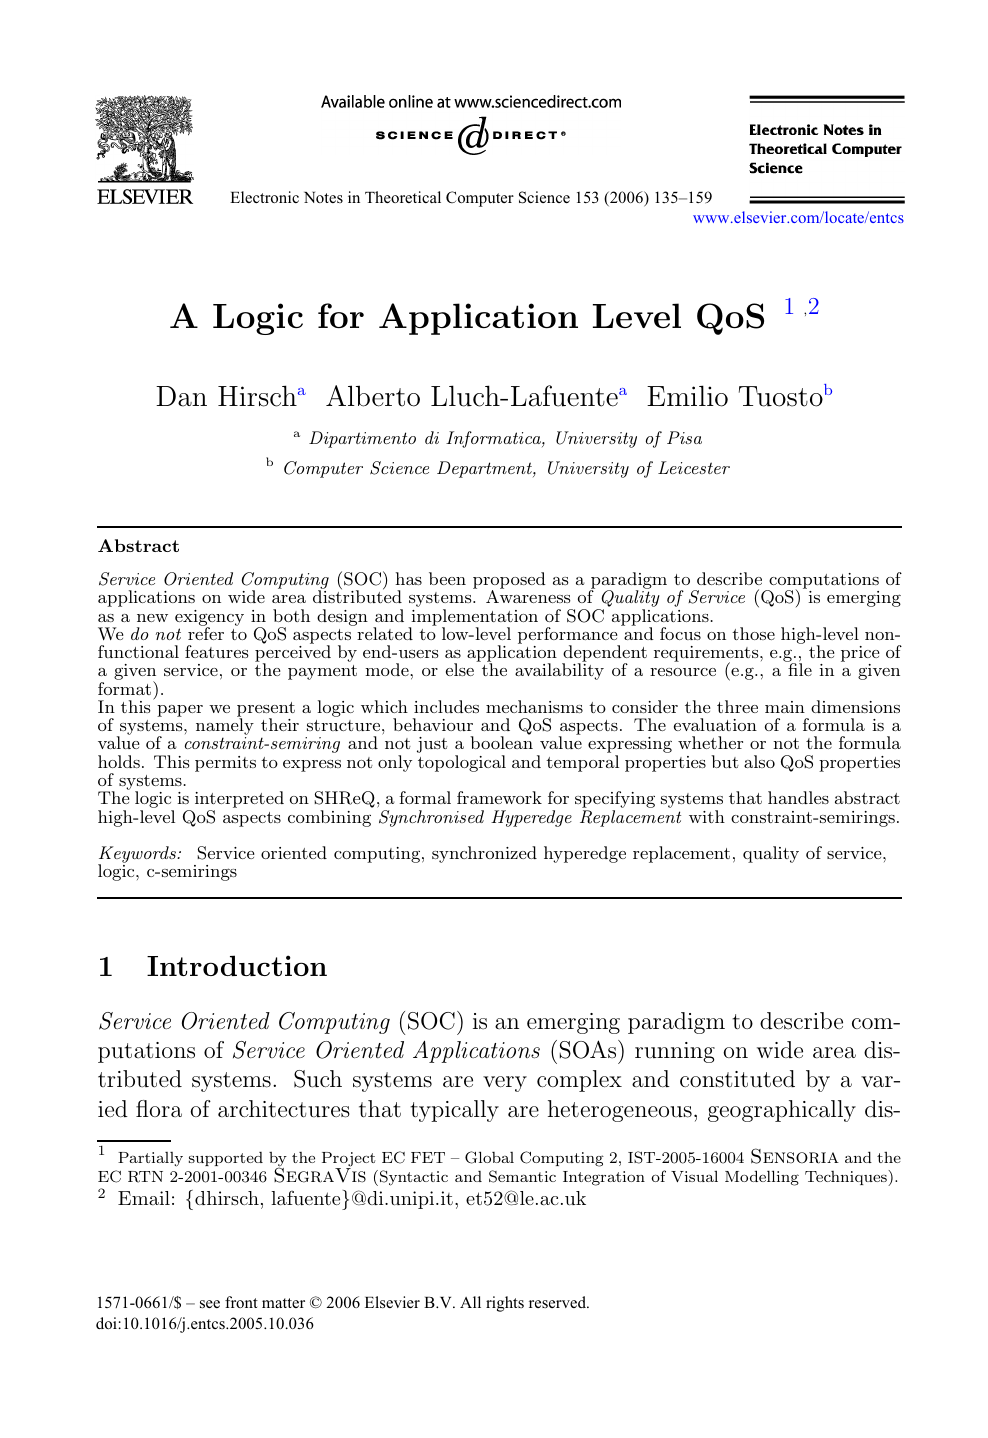 A Logic For Application Level Qos Topic Of Research Paper In Computer And Information Sciences Download Scholarly Article Pdf And Read For Free On Cyberleninka Open Science Hub